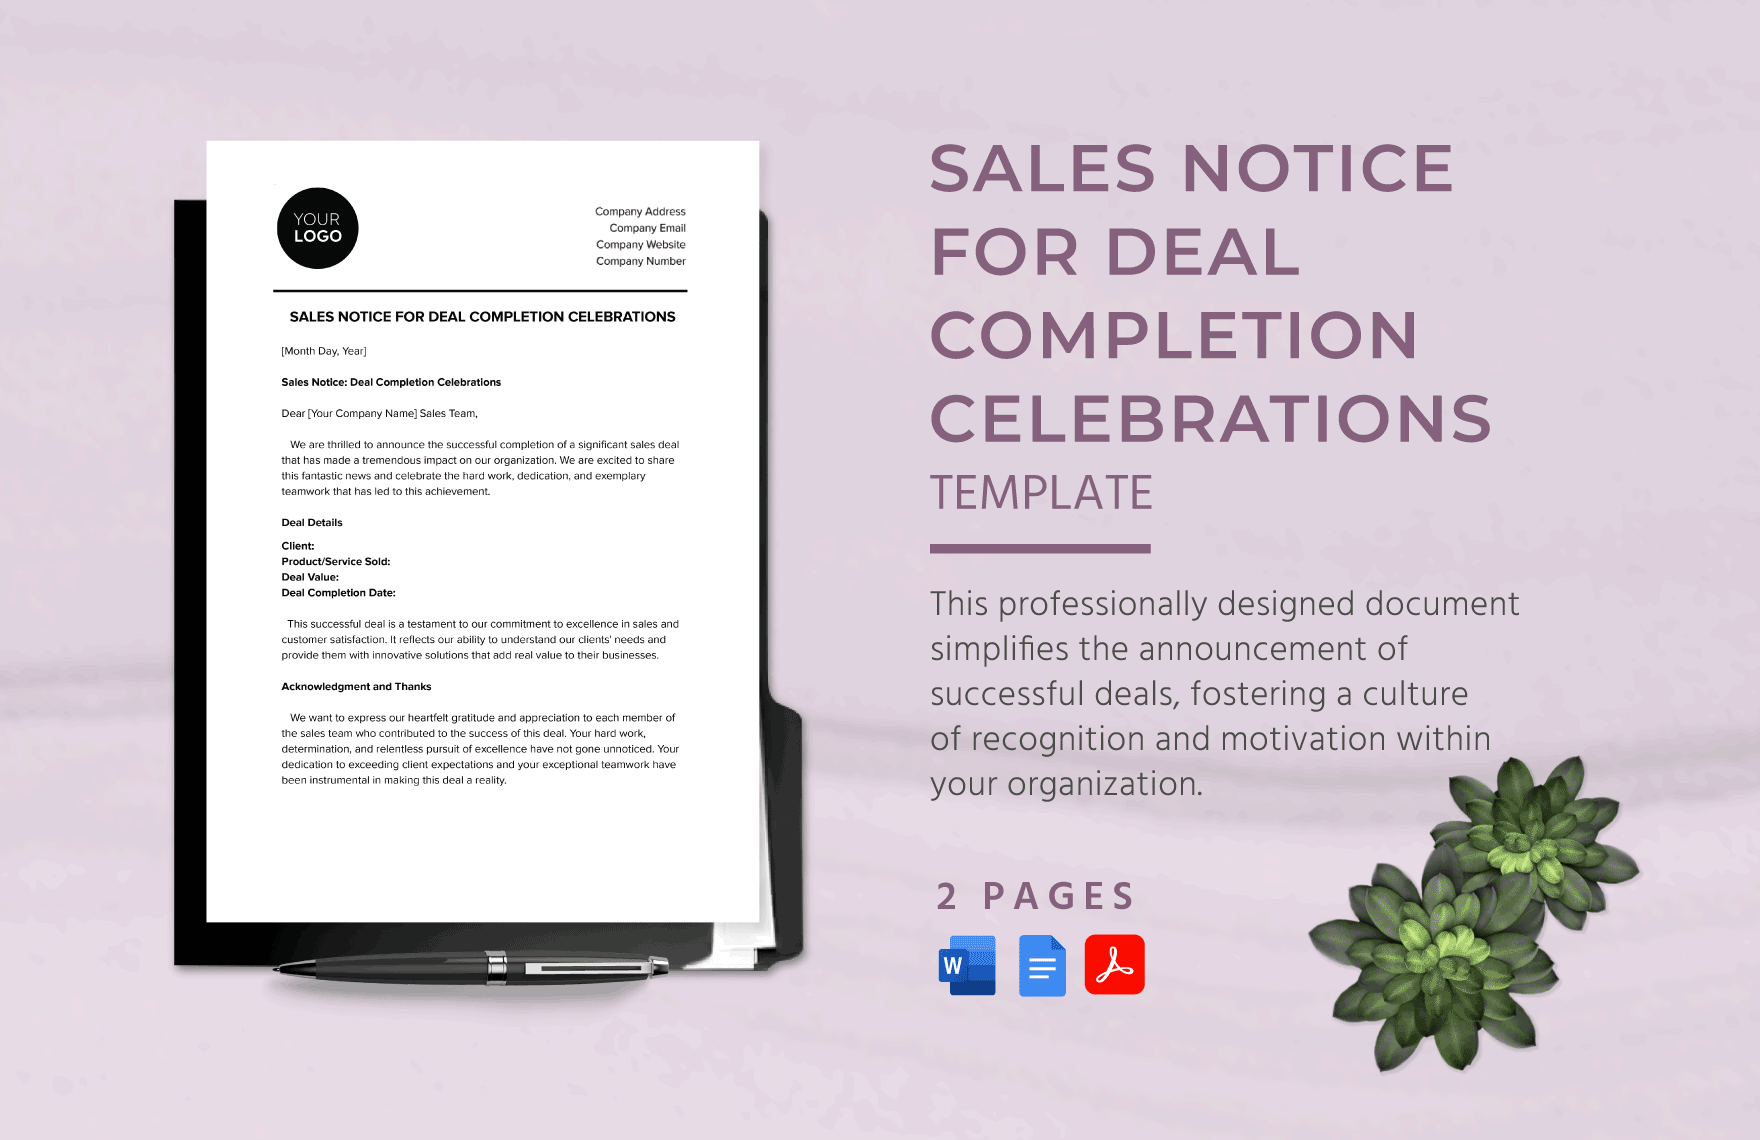 Sales Notice for Deal Completion Celebrations Template in Word, Google Docs, PDF